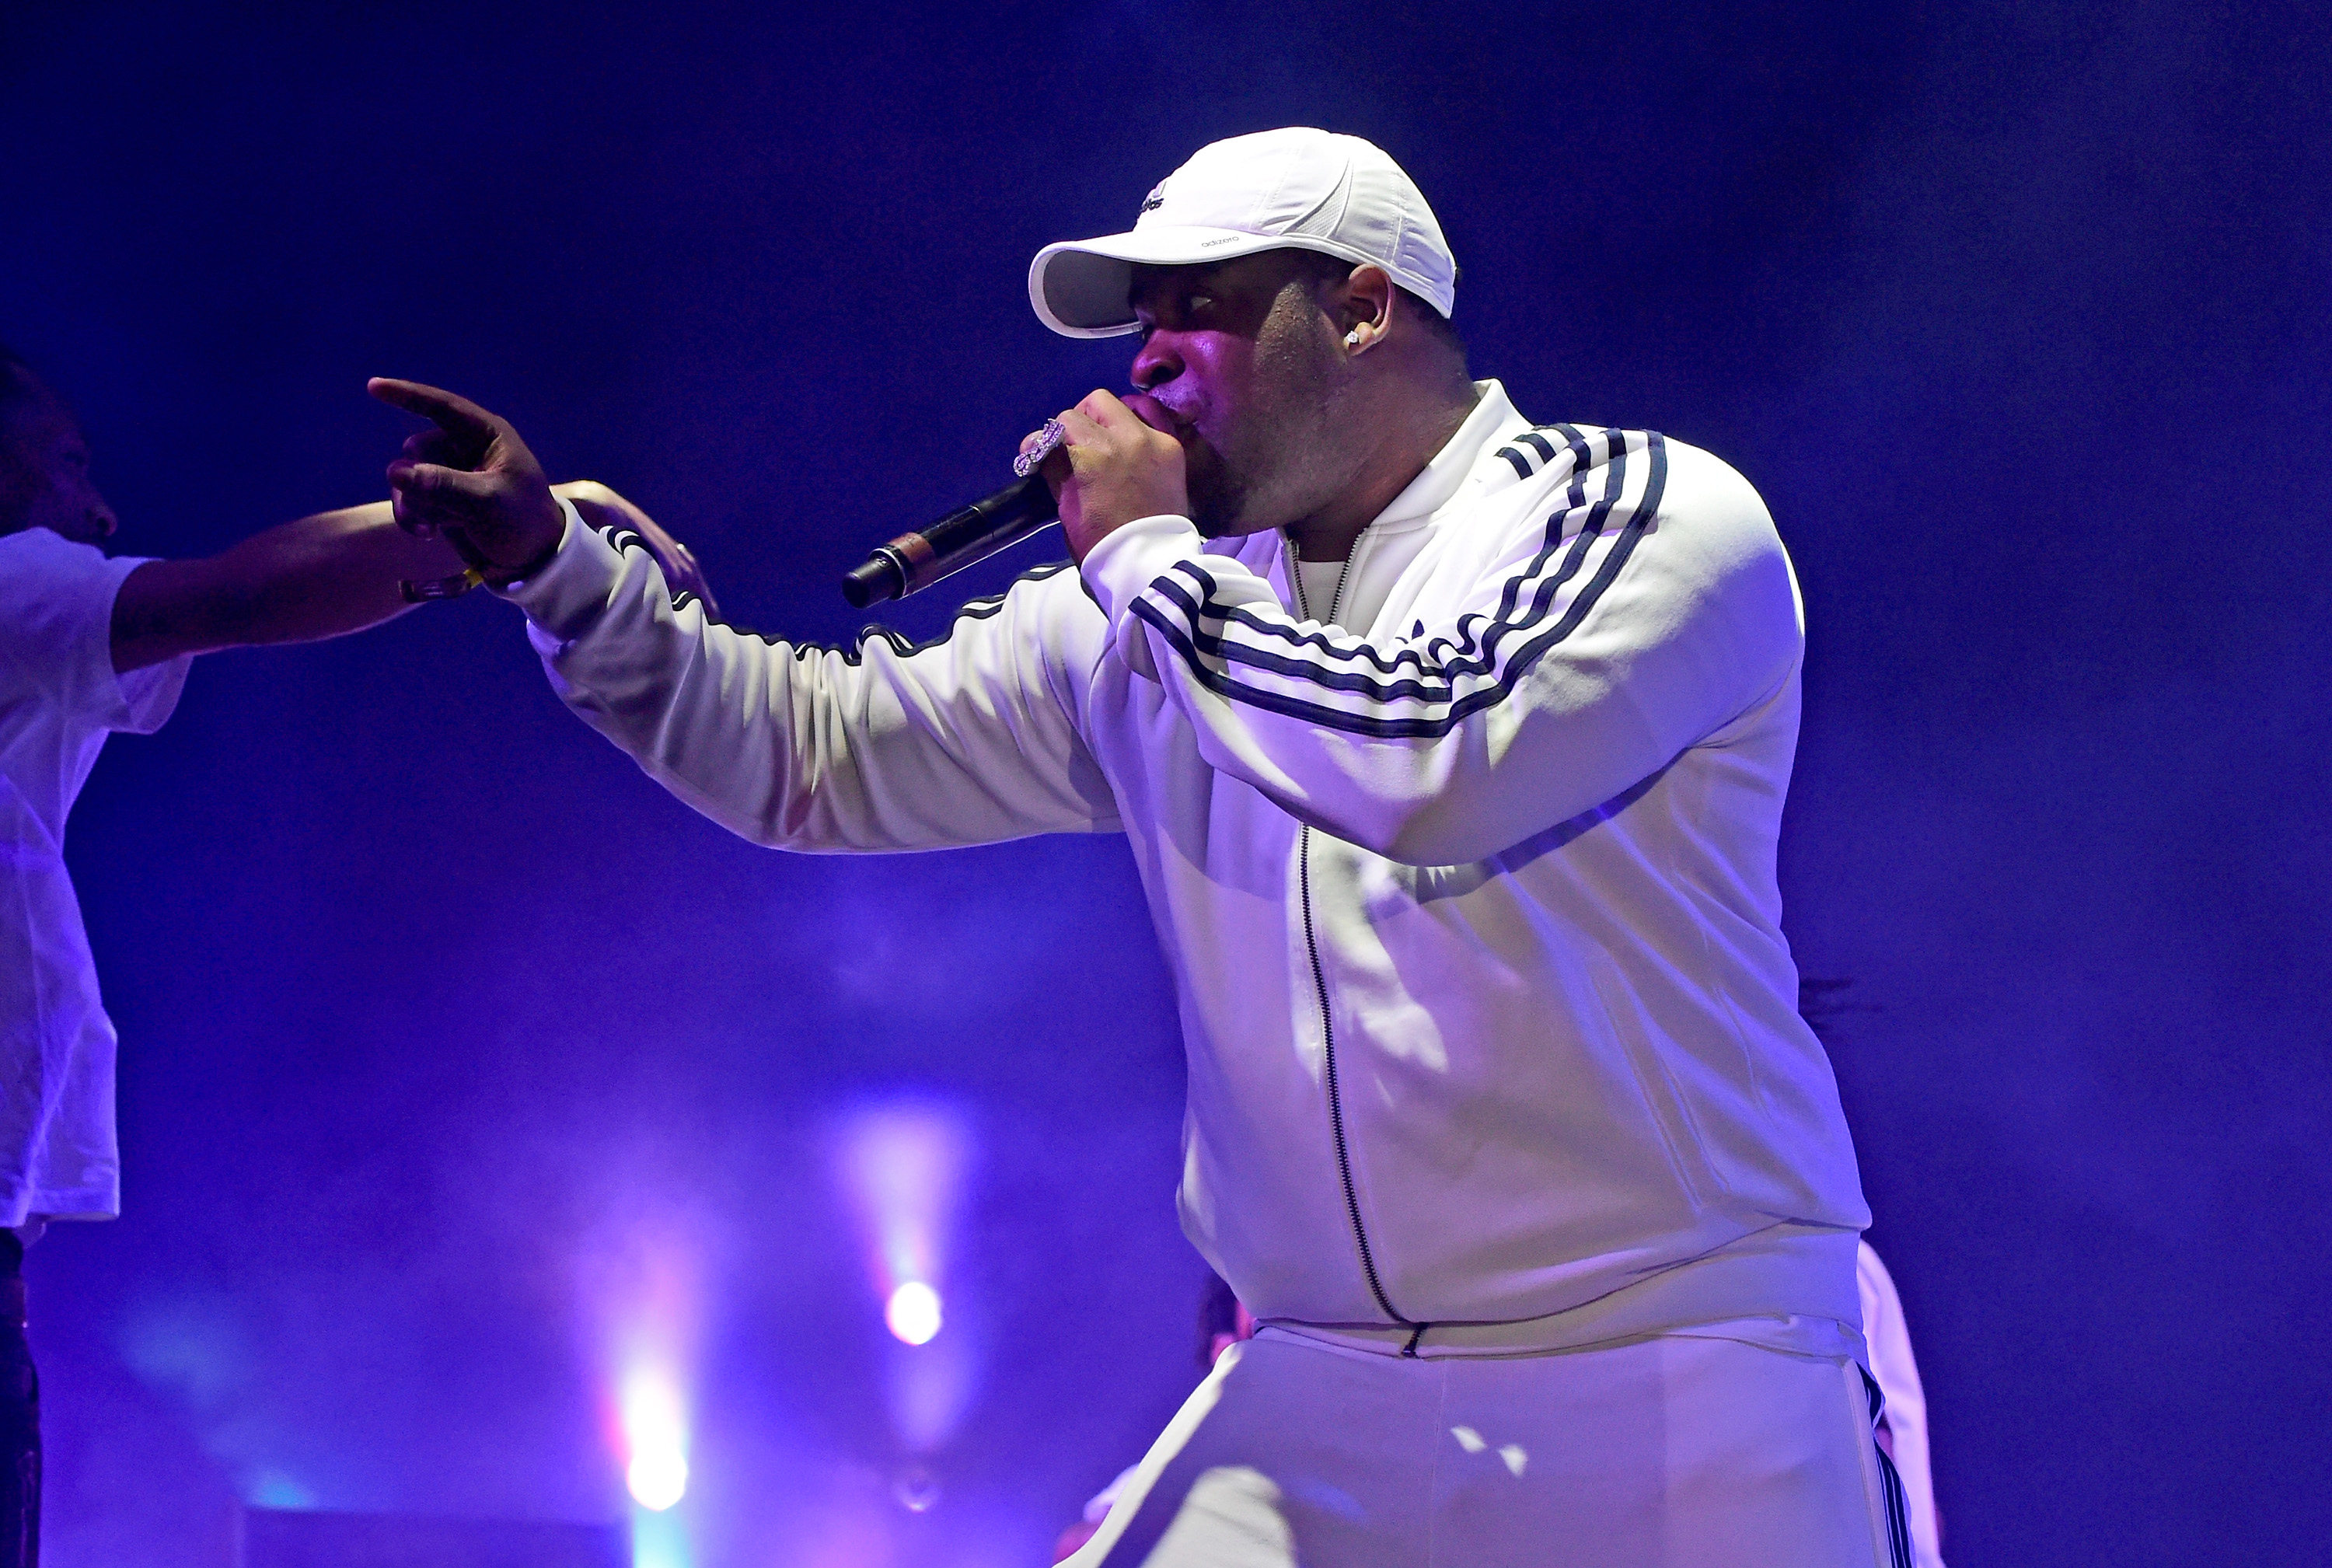 A$AP Ferg at 2016 Coachella Valley Music And Arts Festival - Weekend 2 - Day 1